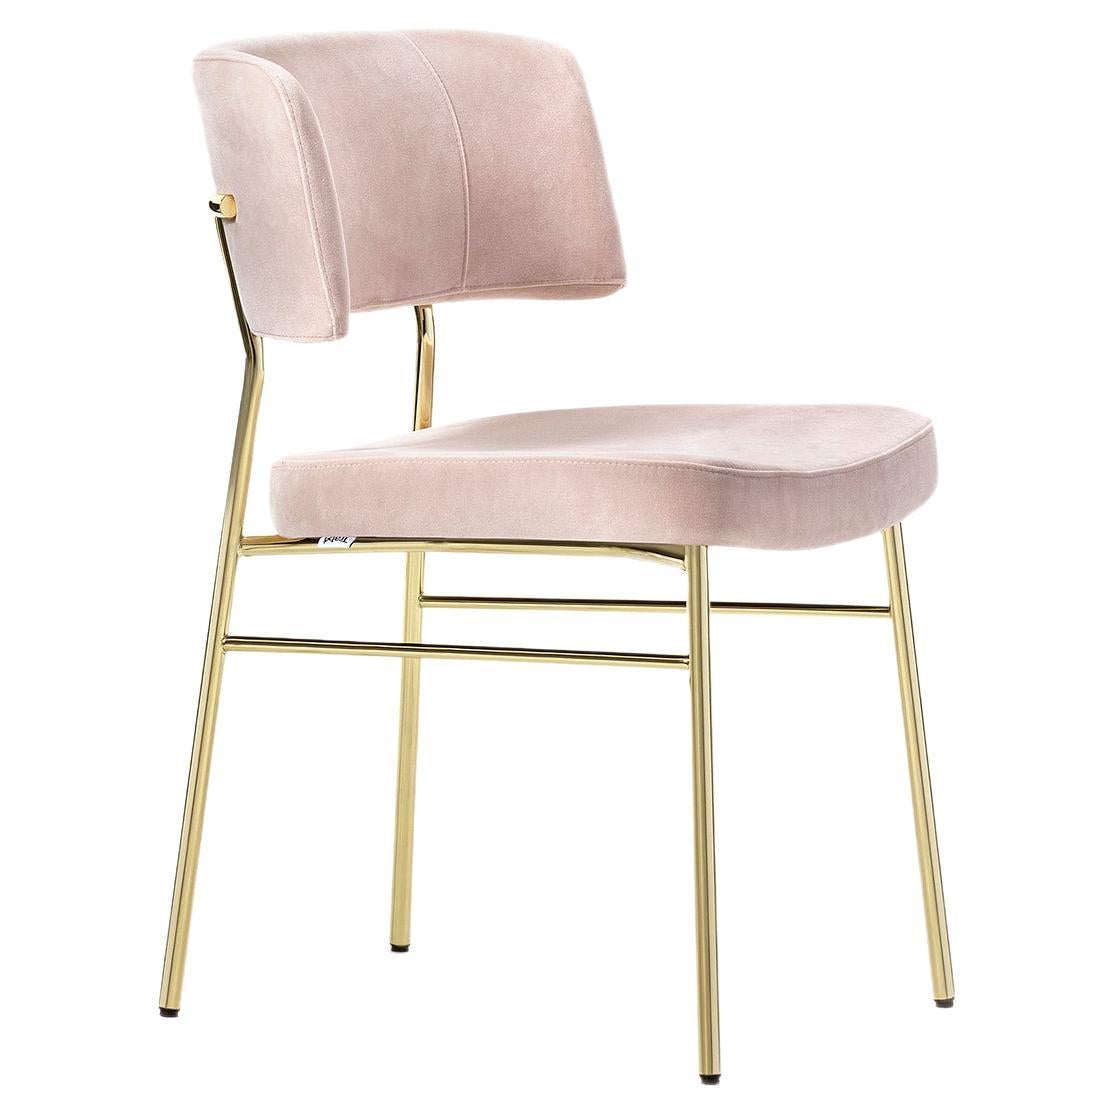 Marlen 0161 Chair, Rose, Indoor, Chair, Brass Shiny, Home, Contract, Living For Sale